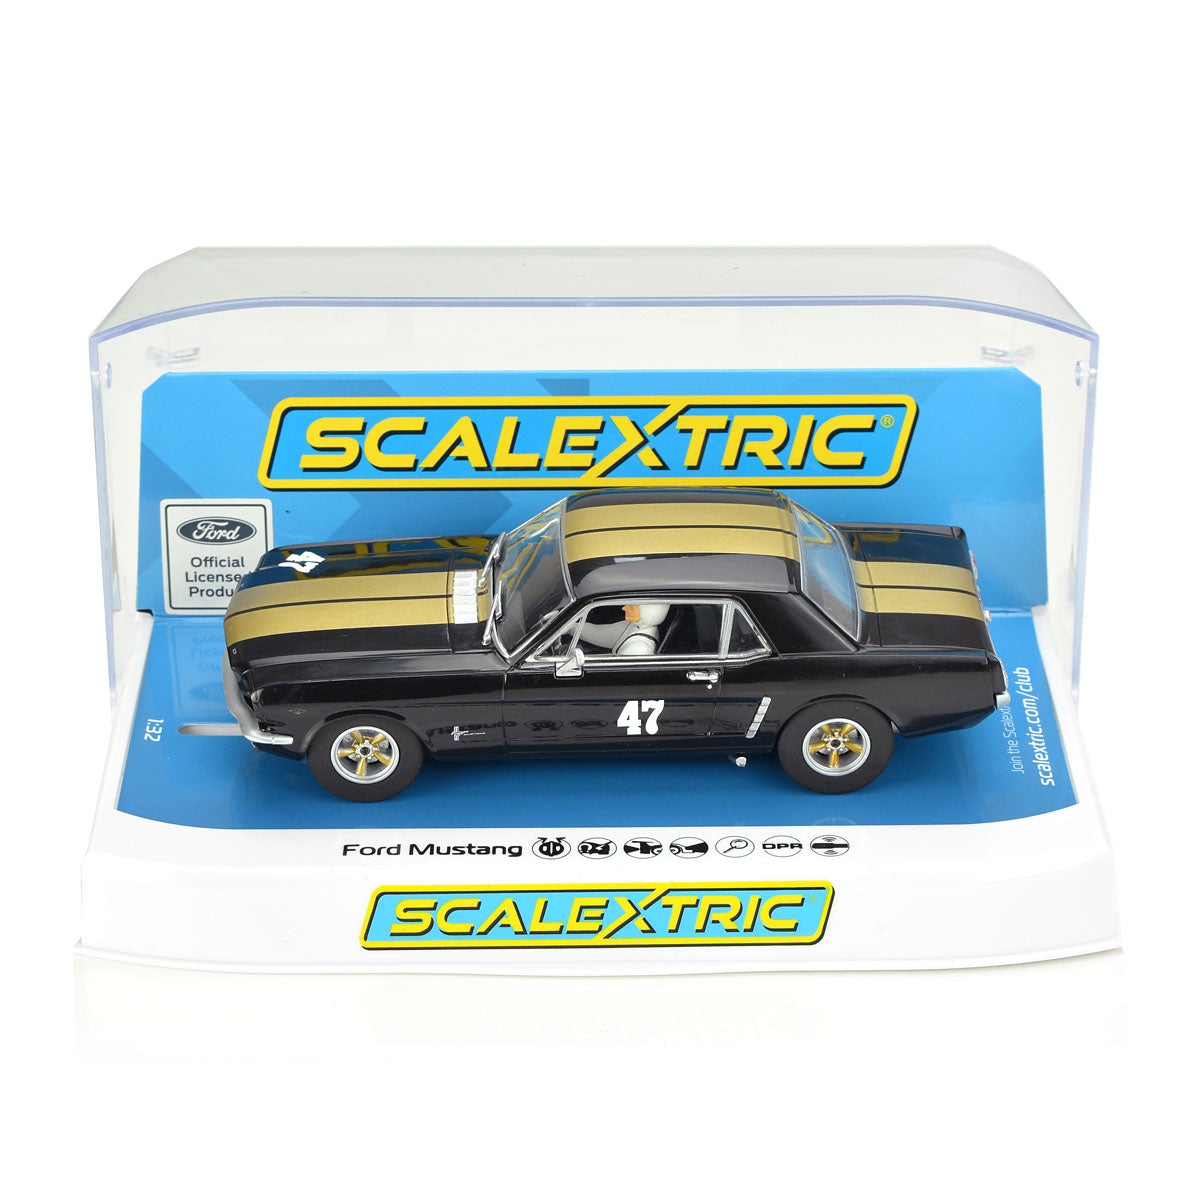 Scalextric C4405 Ford Mustang #47 Black and Gold 1/32 slot Car DPR - PowerHobby